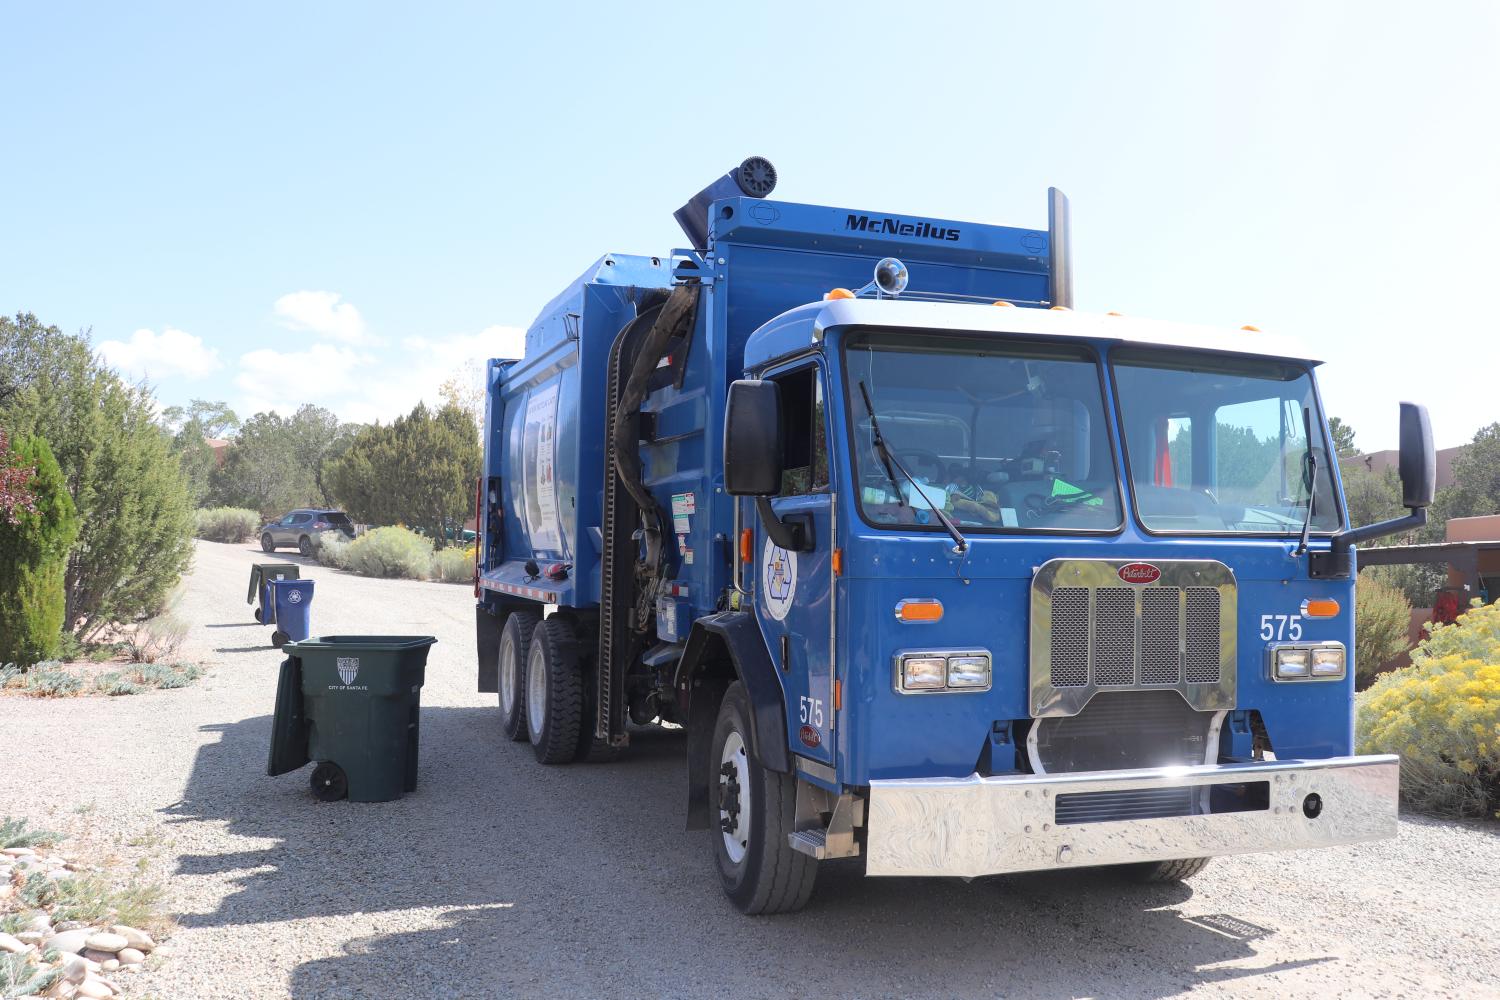 A blue recycling truck next to waste bins.